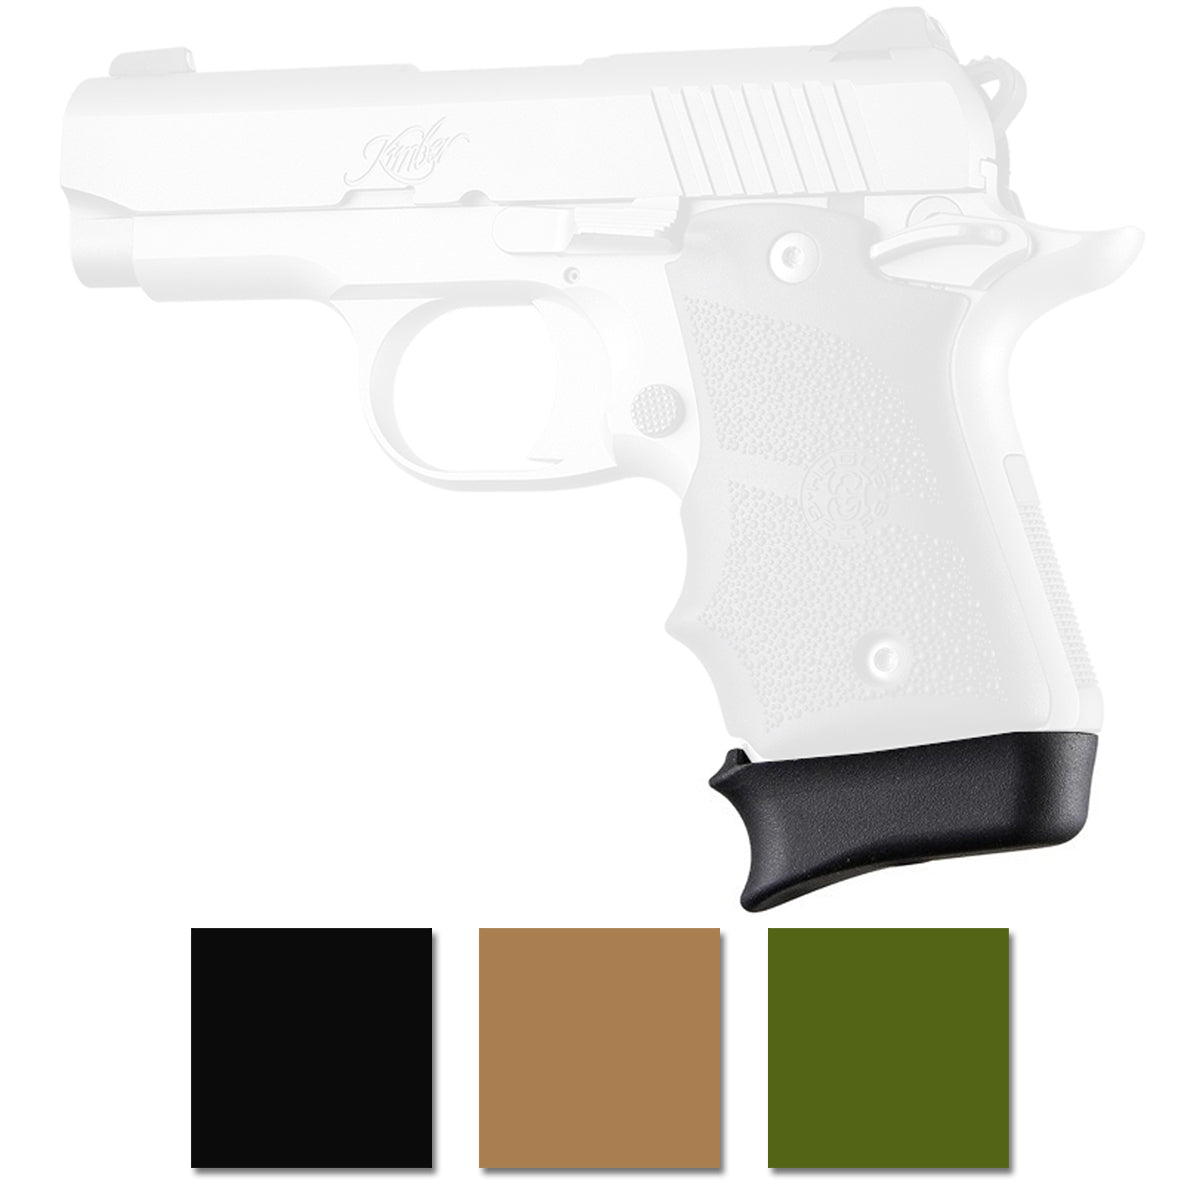 Hogue Kimber Micro 9 Cobblestone Rubber Grip with Finger Grooves Hogue